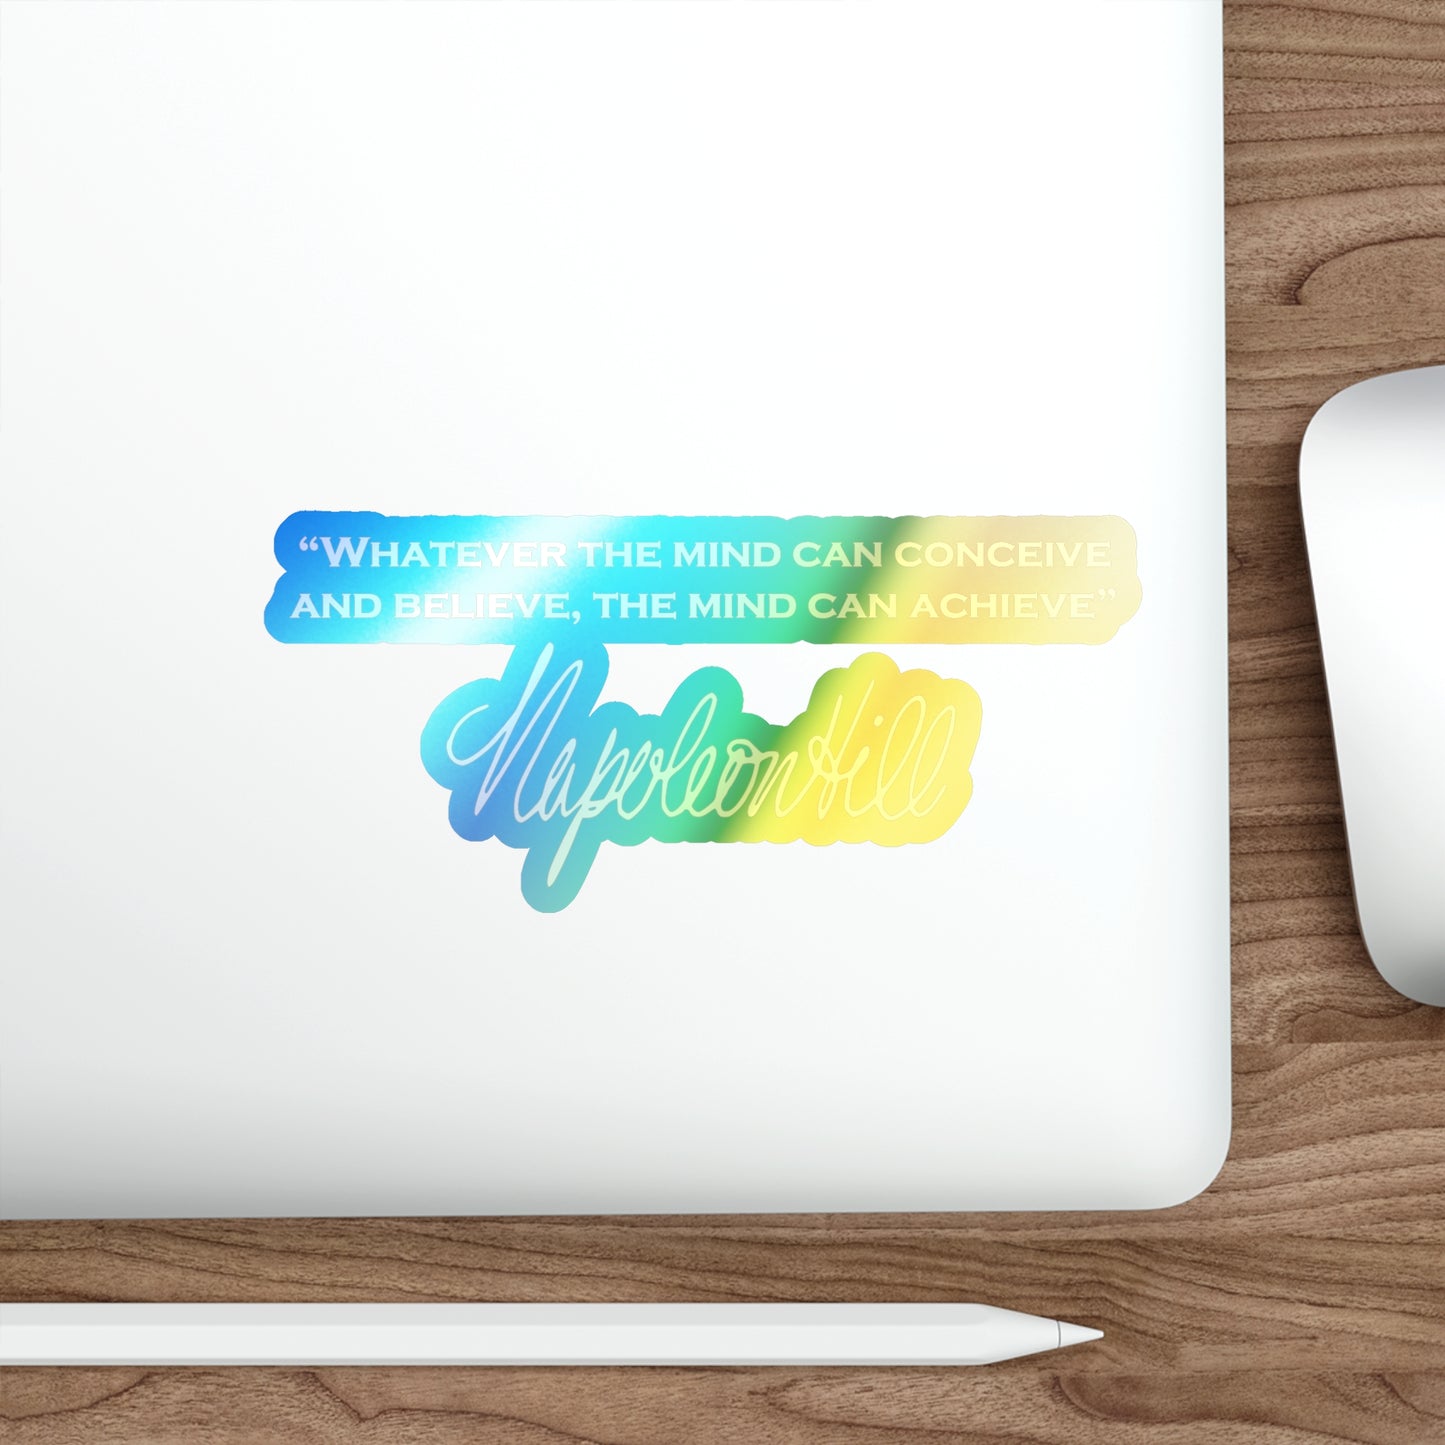 Holographic Die-cut Stickers of Napoleon Hill